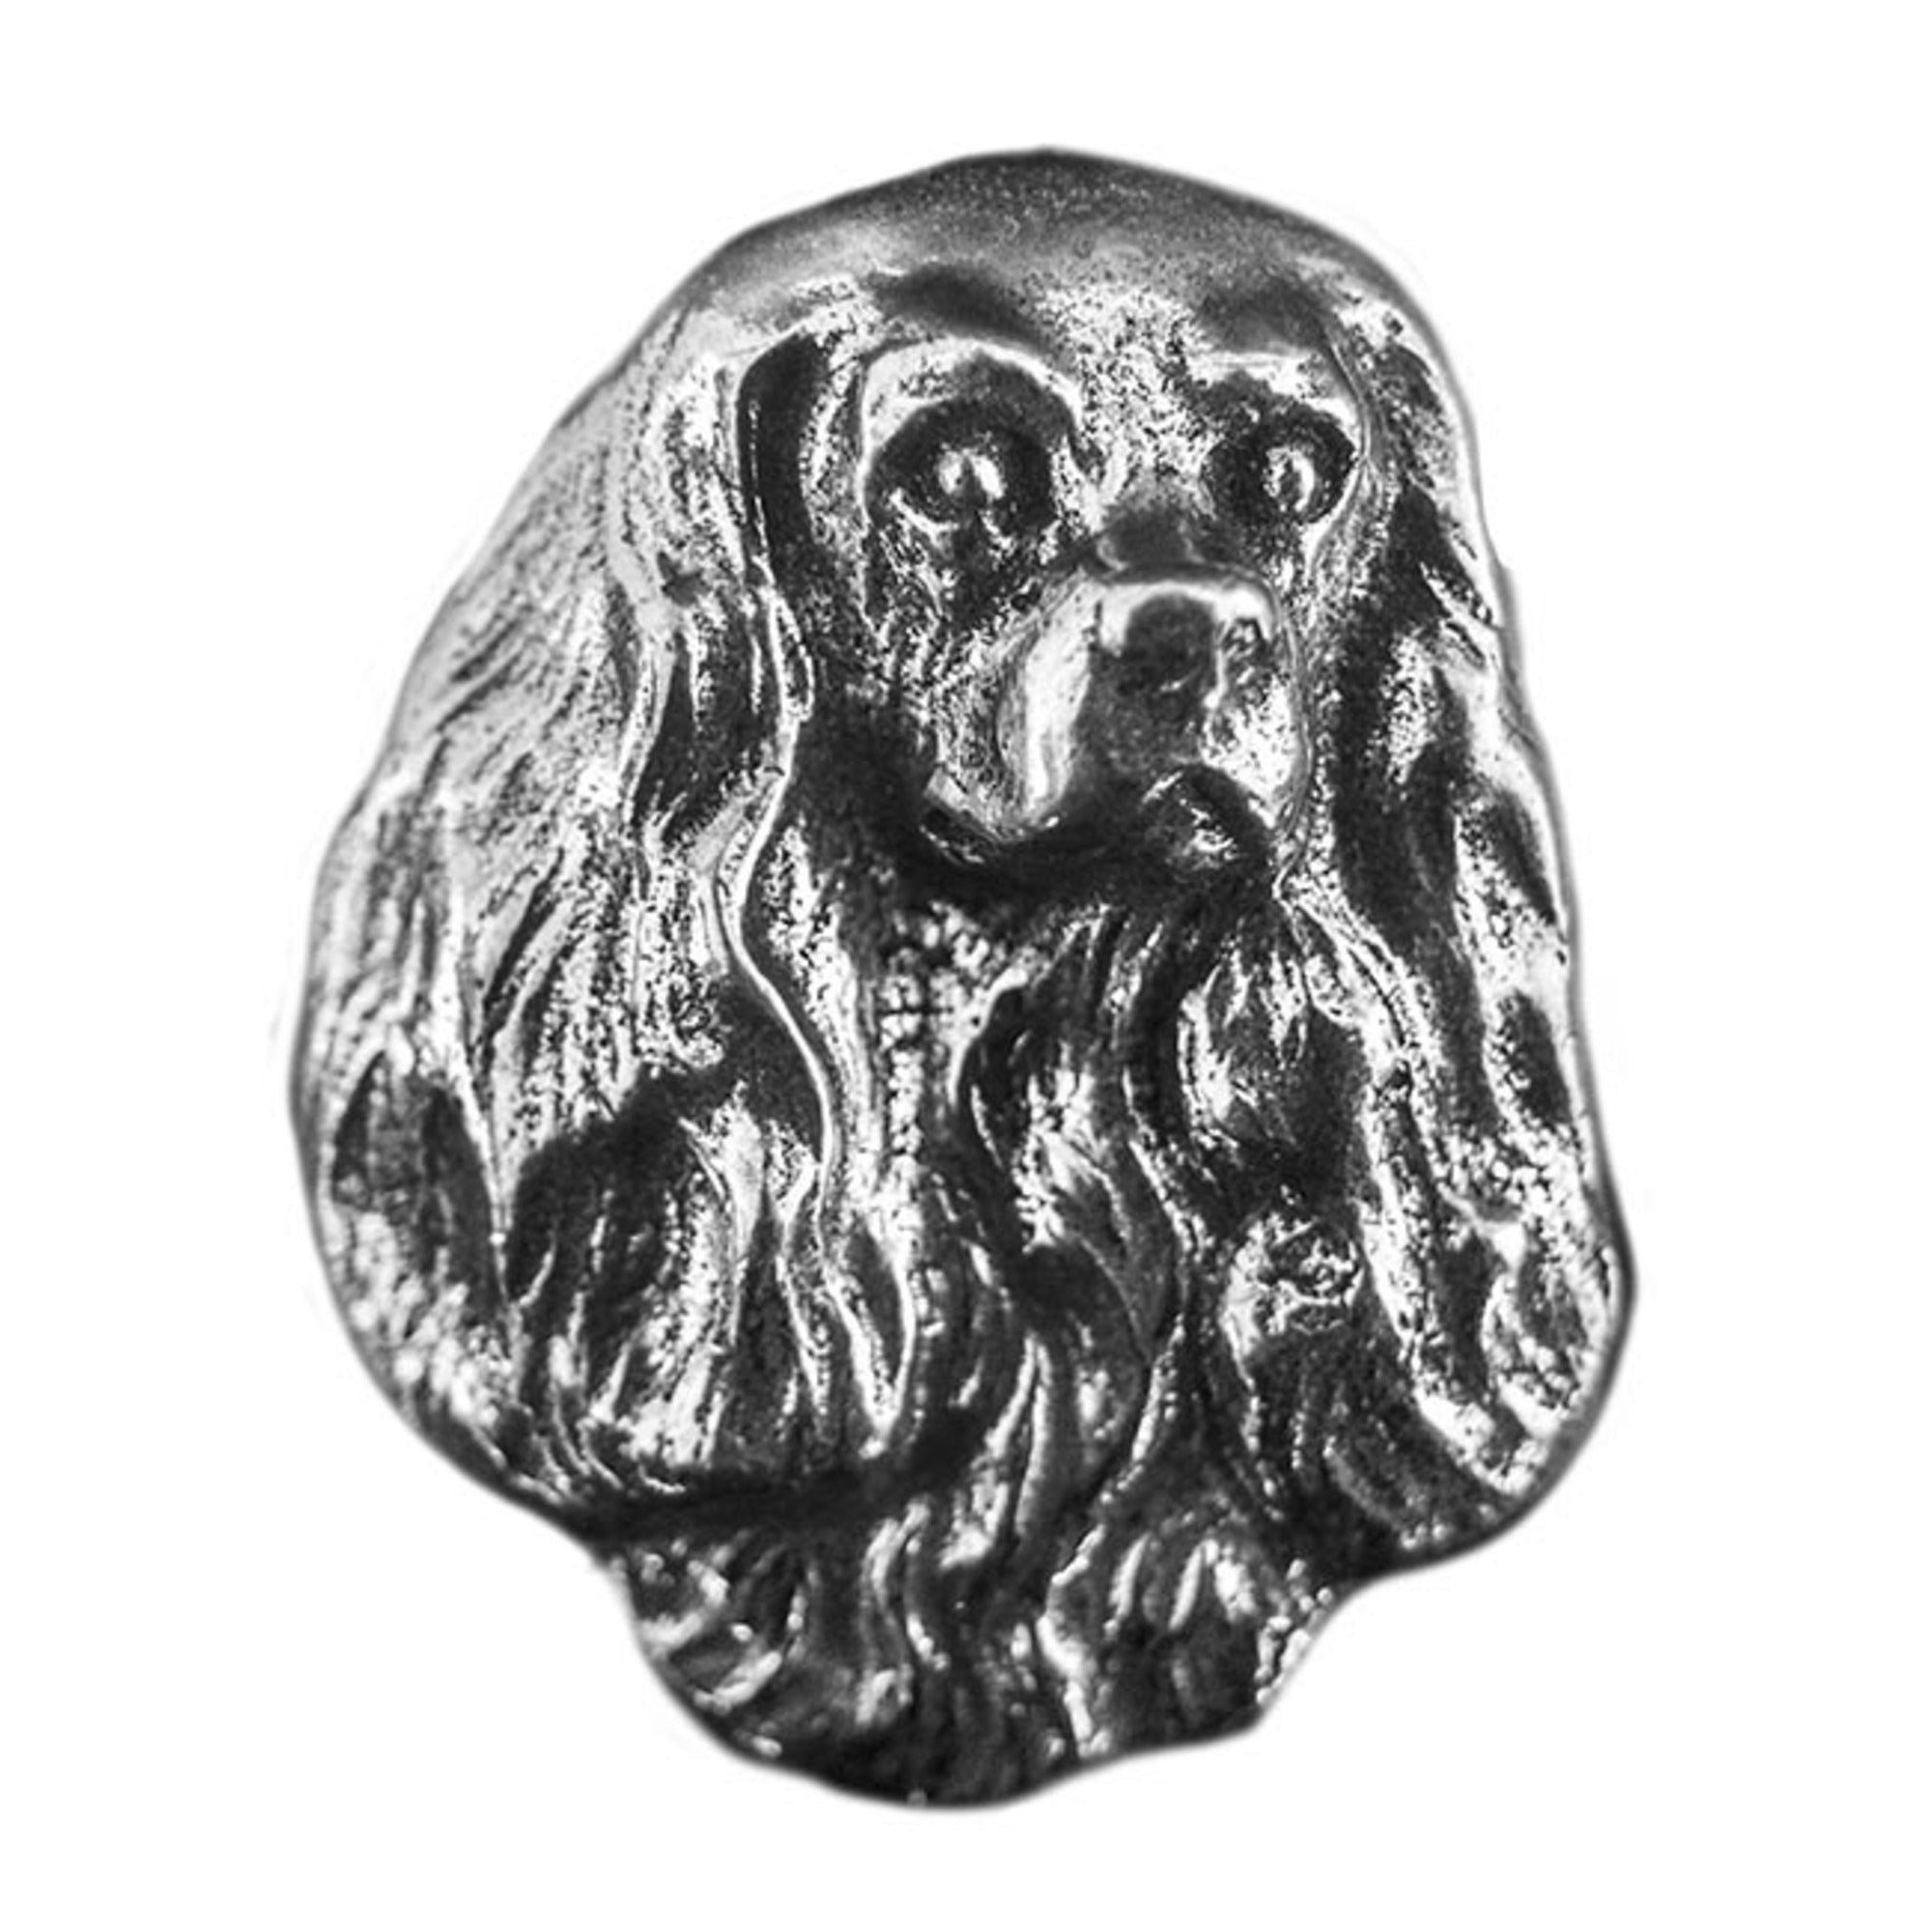 New-Spin Metal Casting Cavalier King Charles Spaniel Magnet